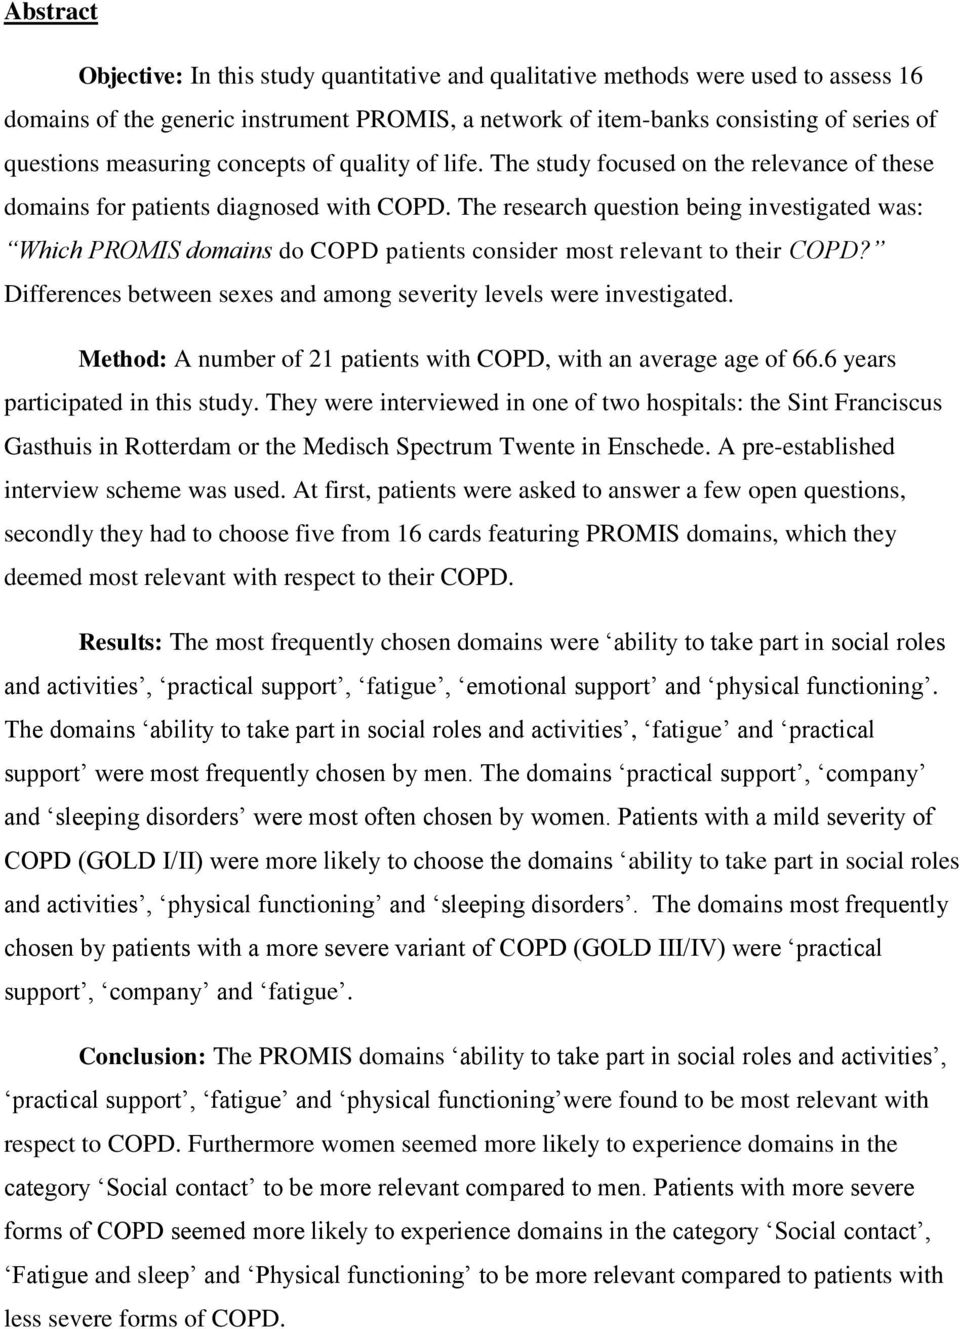 The research question being investigated was: Which PROMIS domains do COPD patients consider most relevant to their COPD? Differences between sexes and among severity levels were investigated.